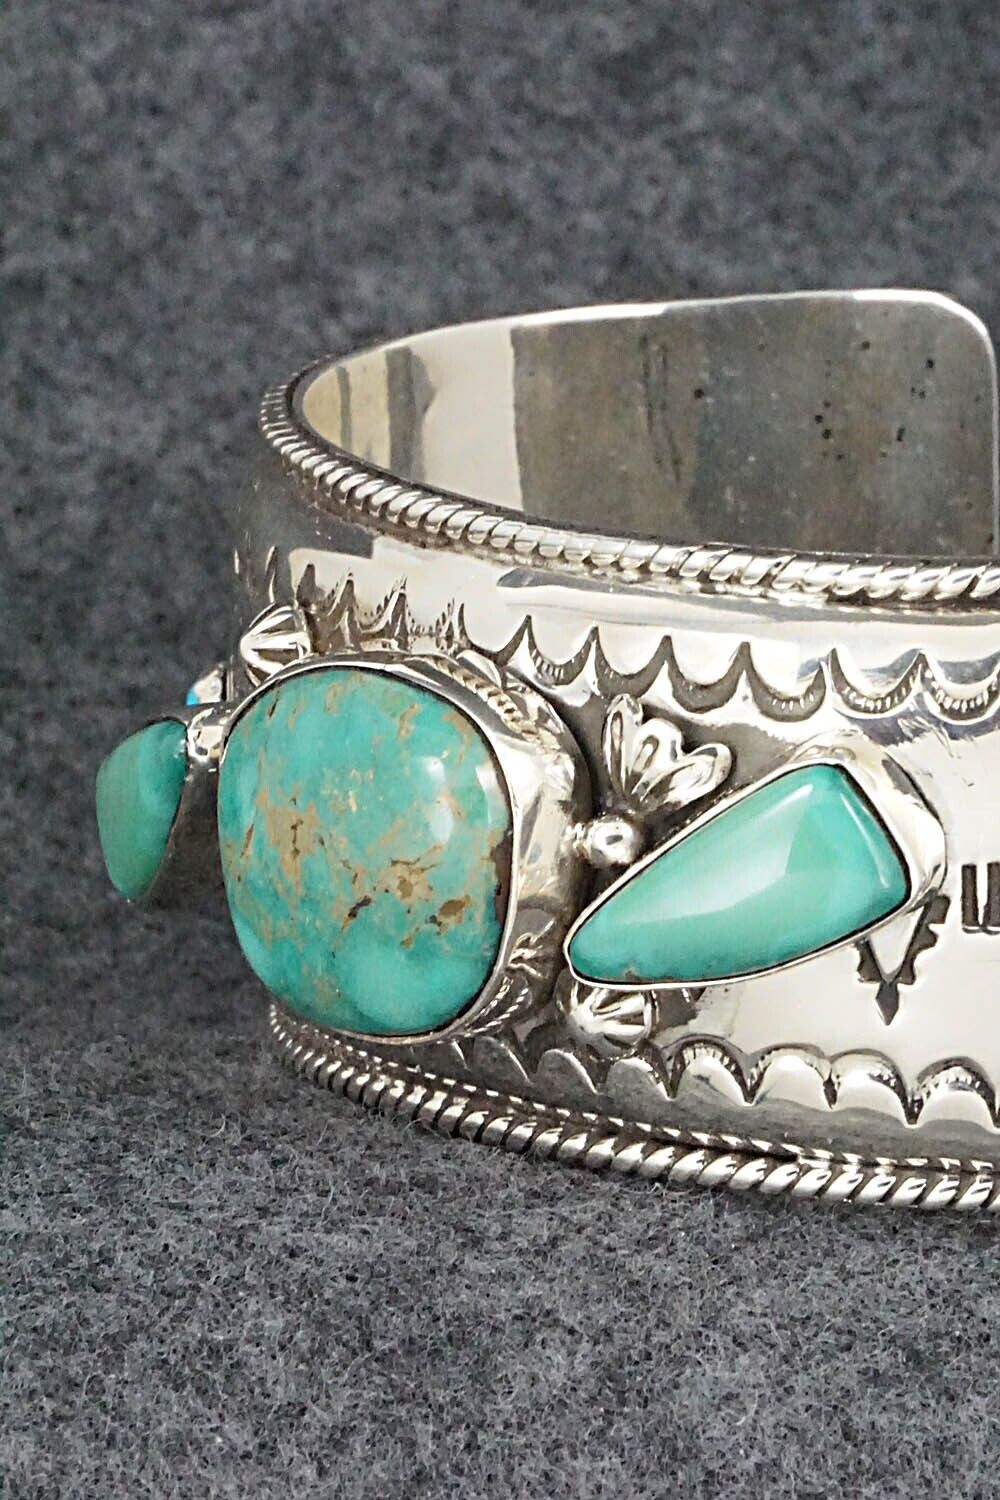 Turquoise, Coral & Sterling Silver Bracelet - Emerson Delgarito